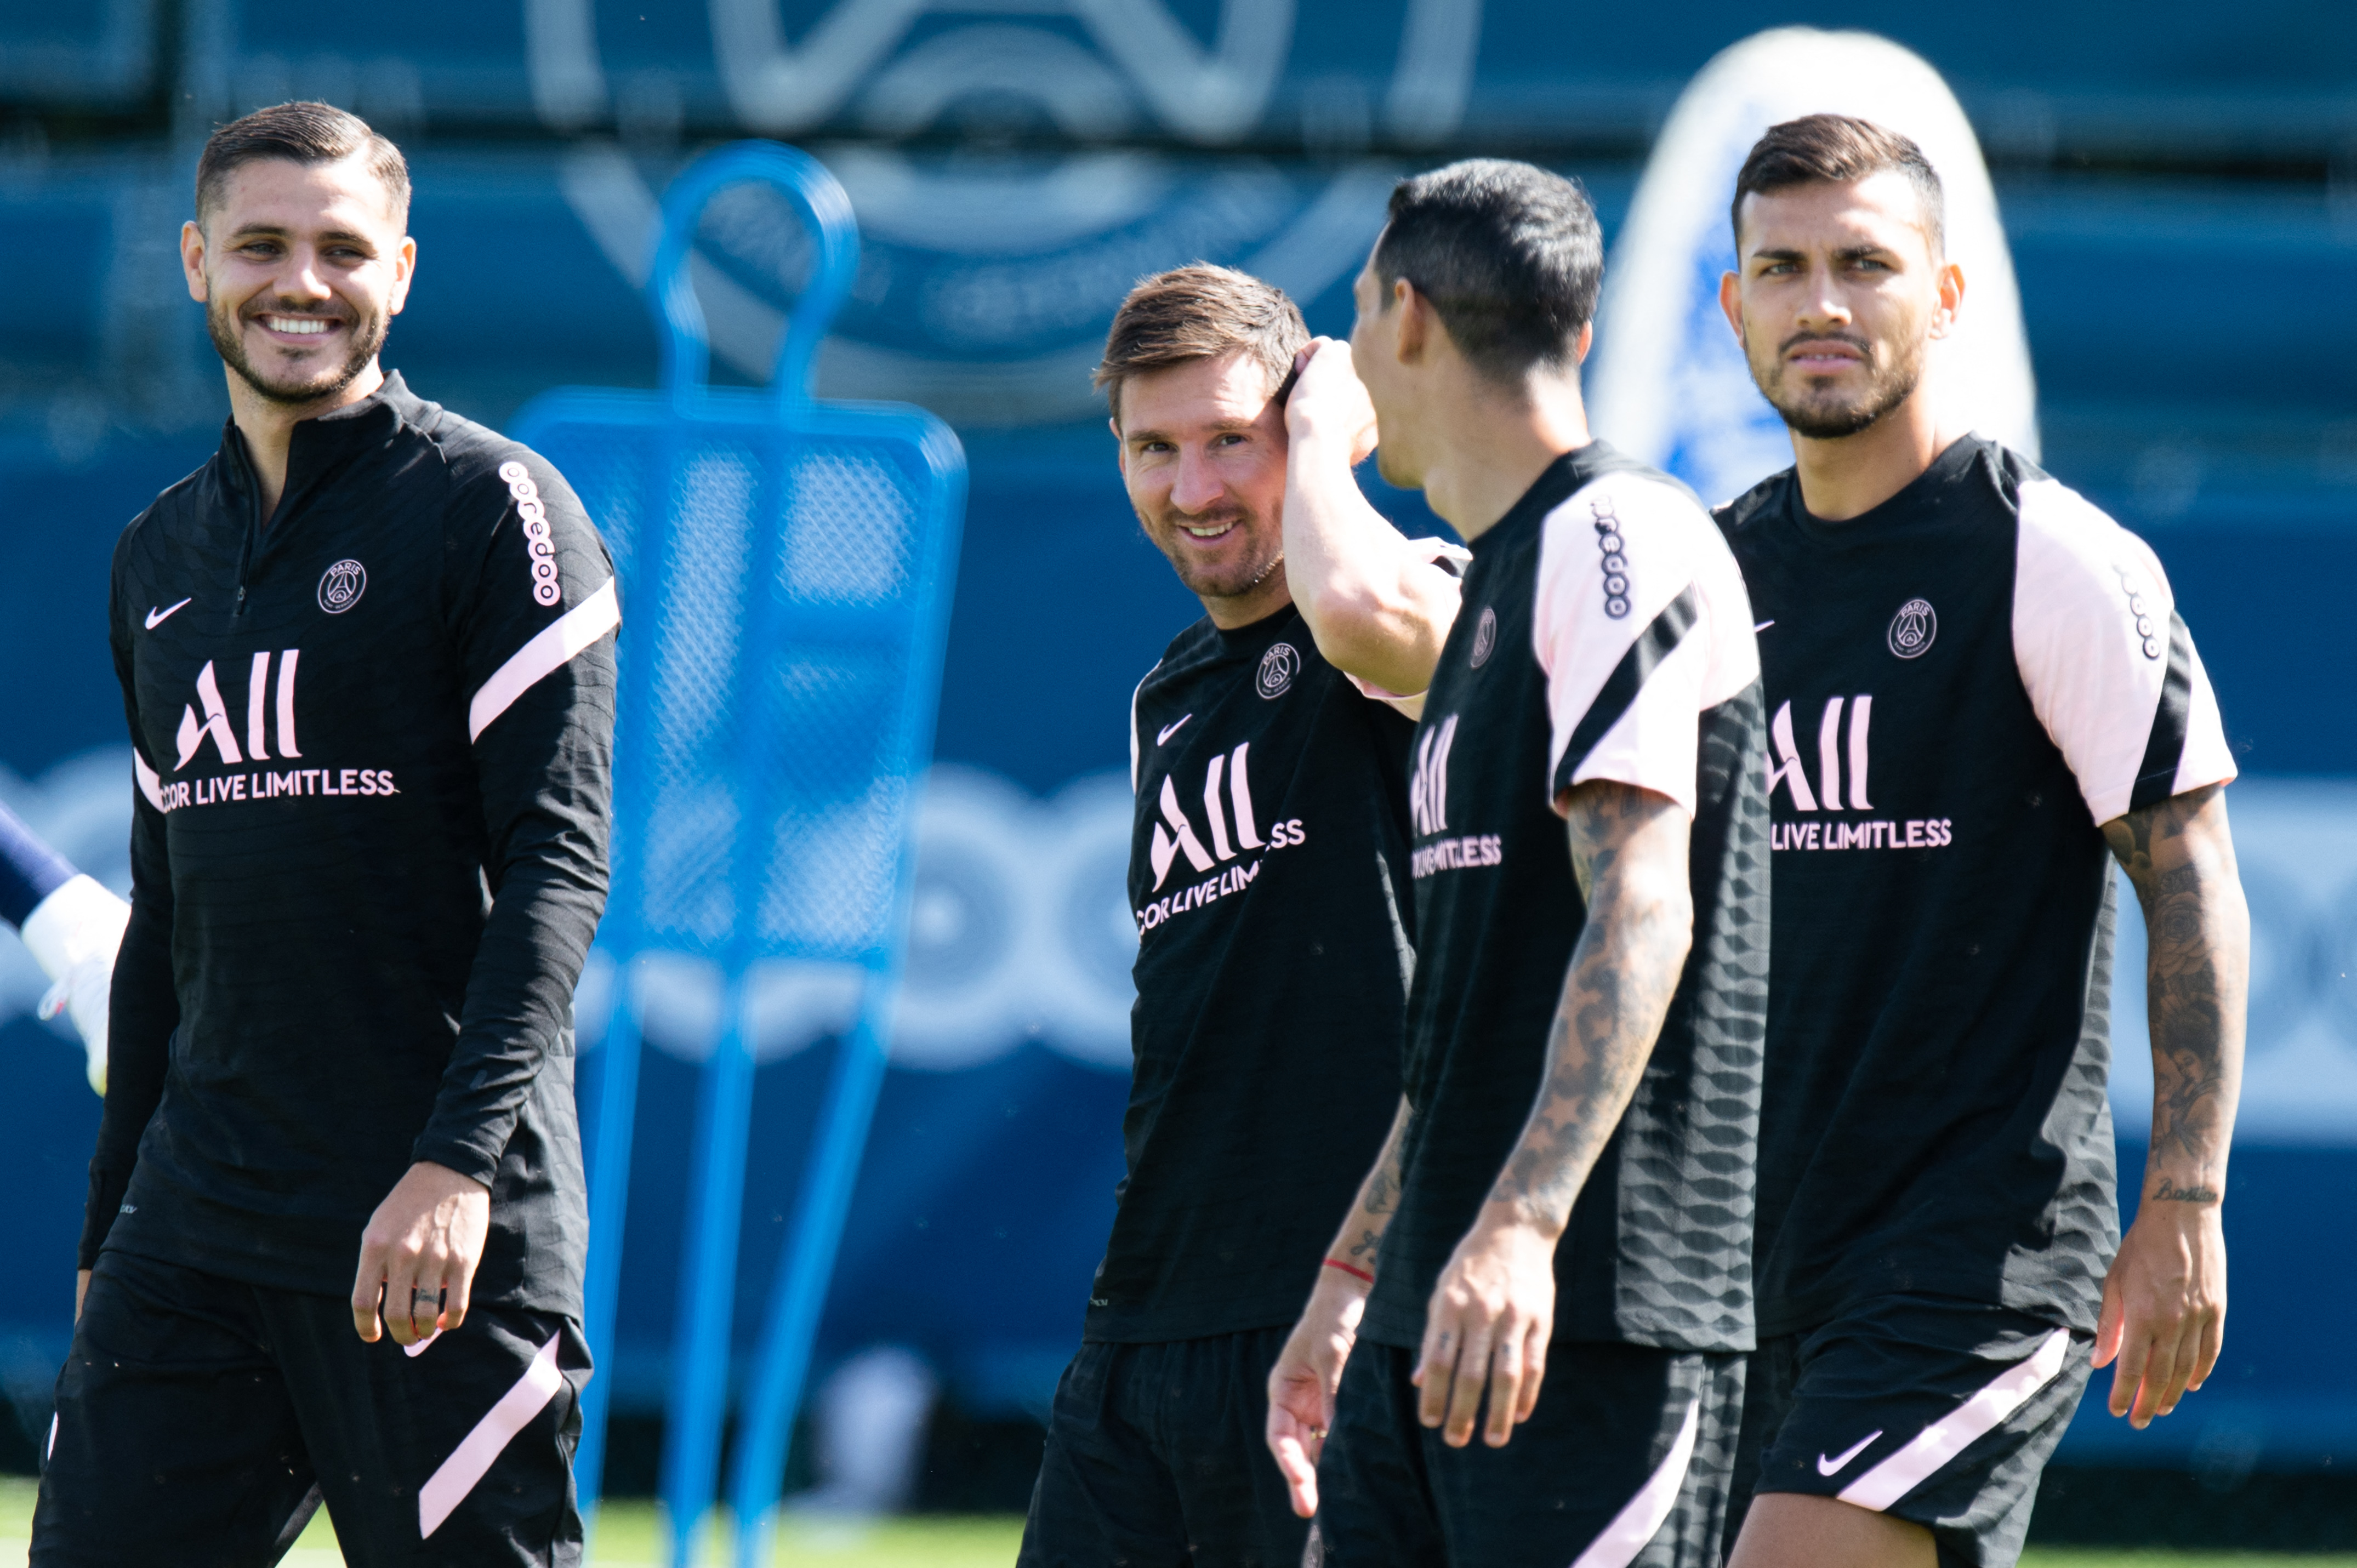 Mauro Icardi opens up on Leo Messi's alleged hatred towards him - Football